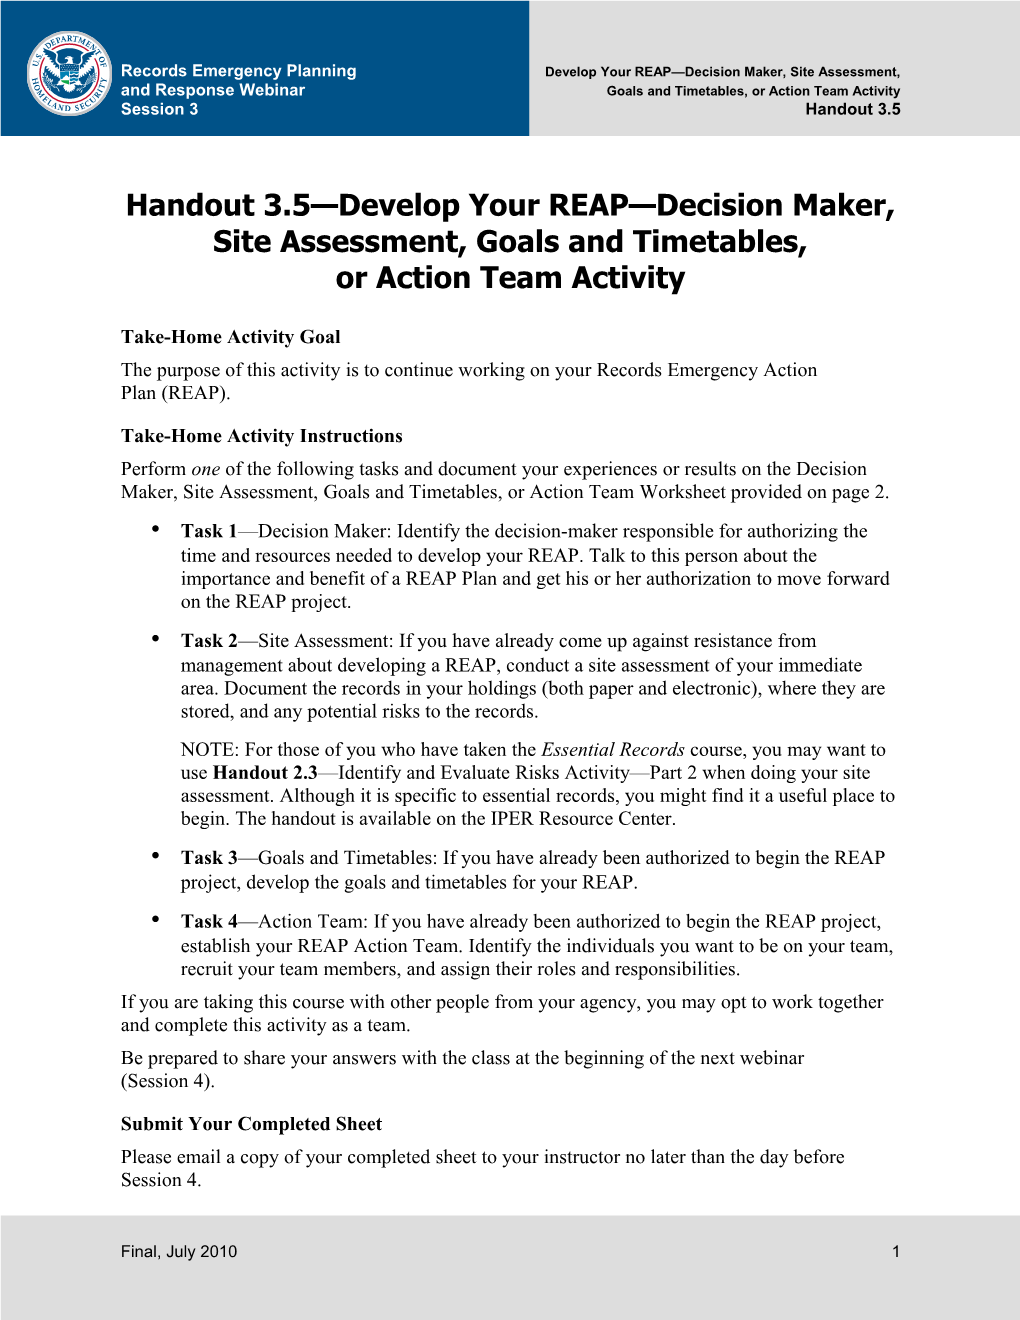 Handout 3.5: Develop Your REAP Decision Maker Site Assessment, Goals and Timetables, Or